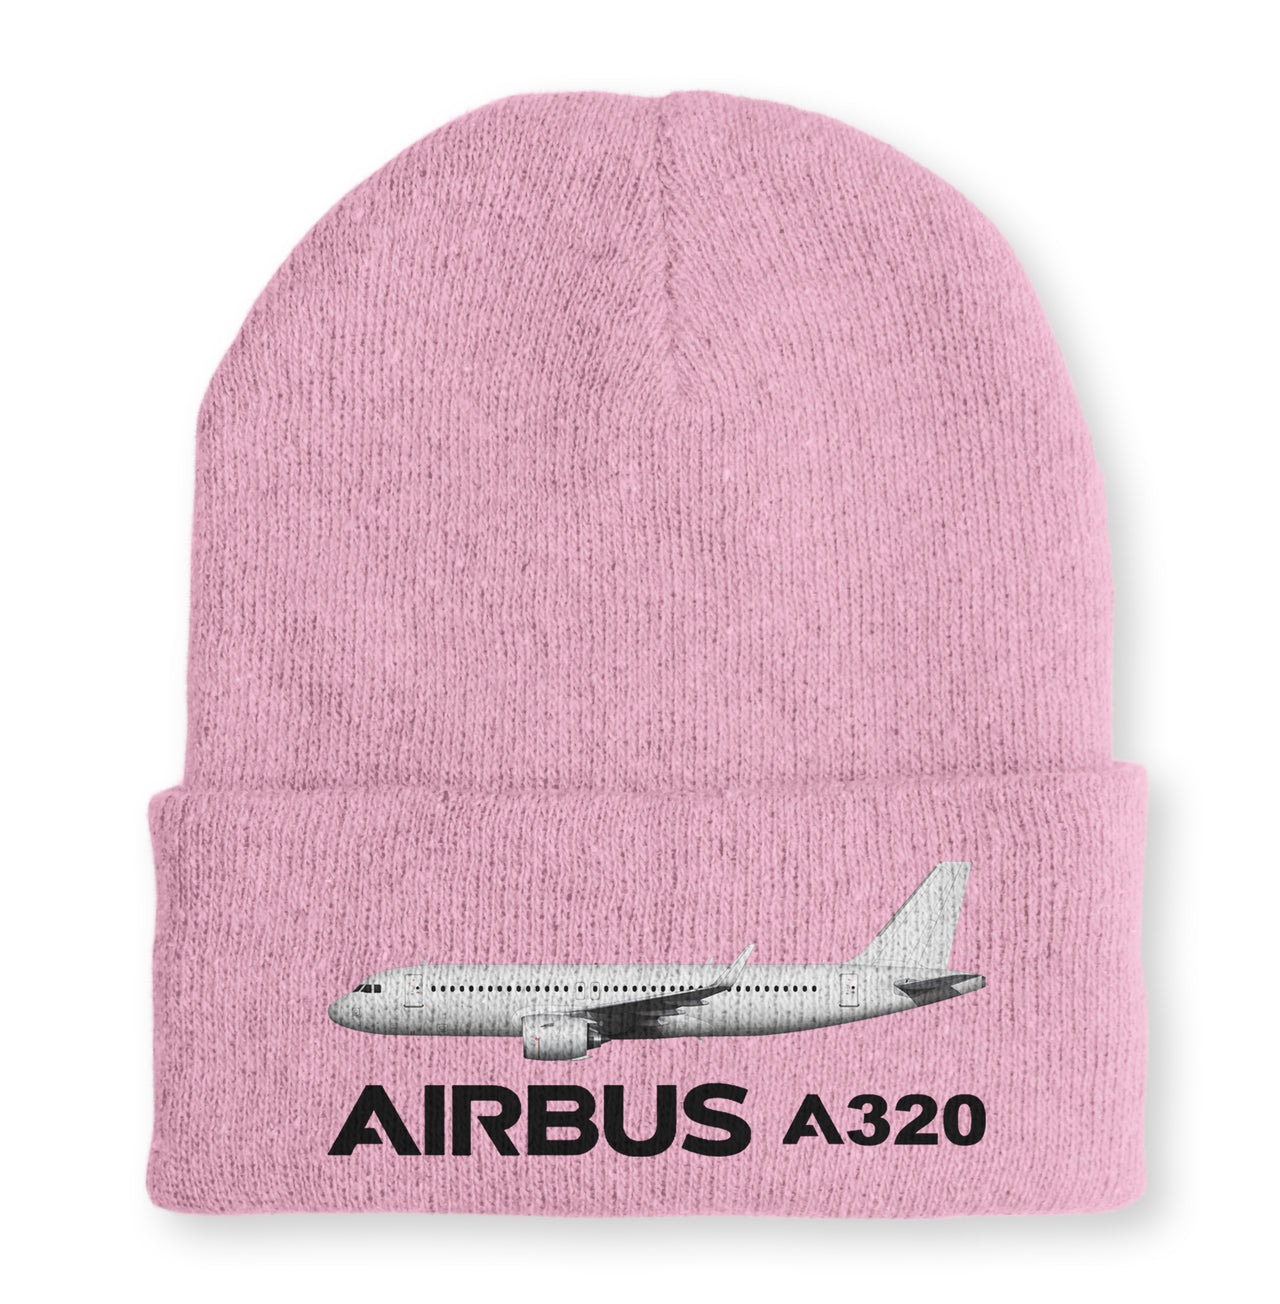 The Airbus A320 Embroidered Beanies